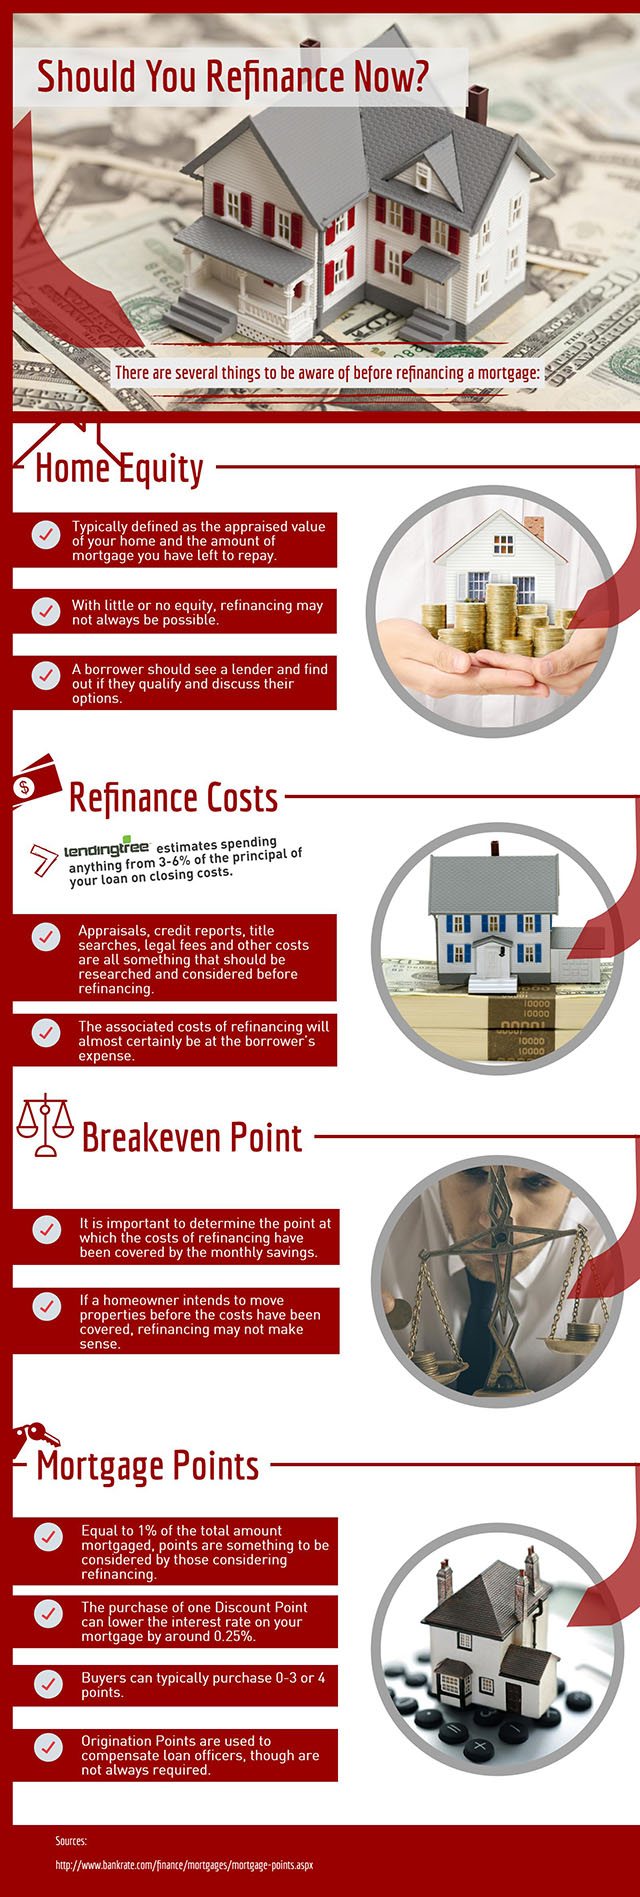 Should You Refinance Now?